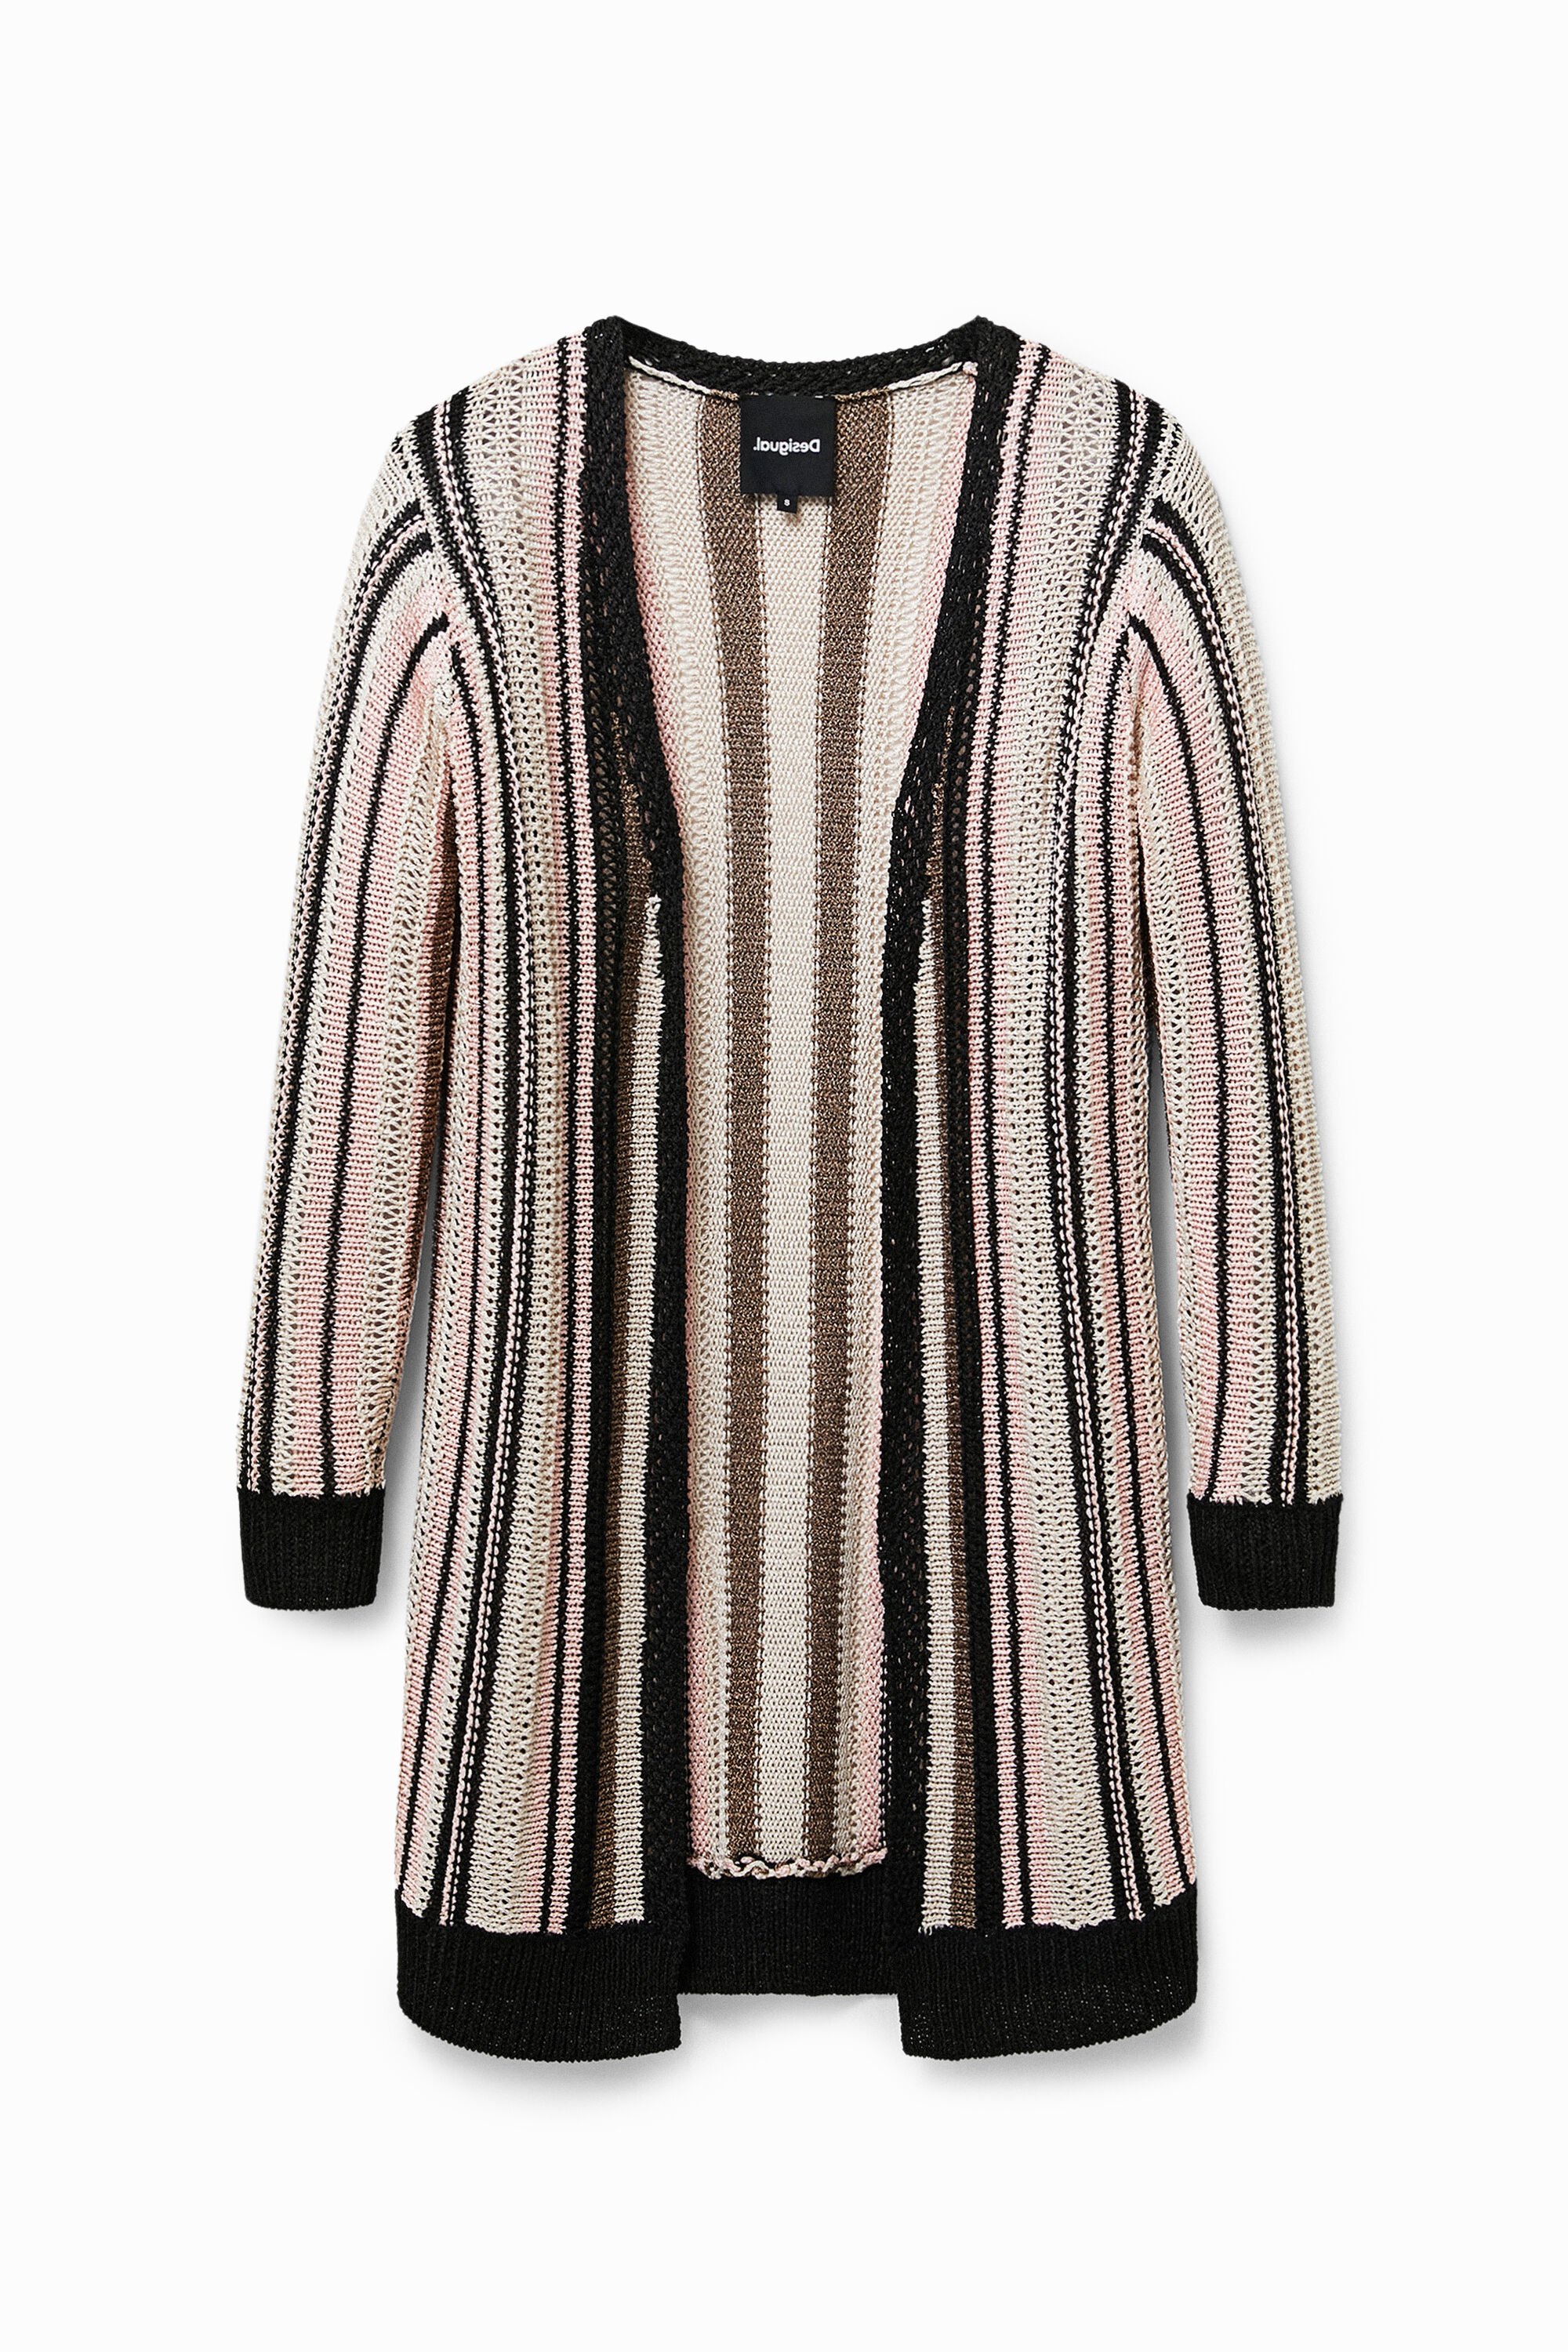 Desigual Long Striped Cardigan In Material Finishes